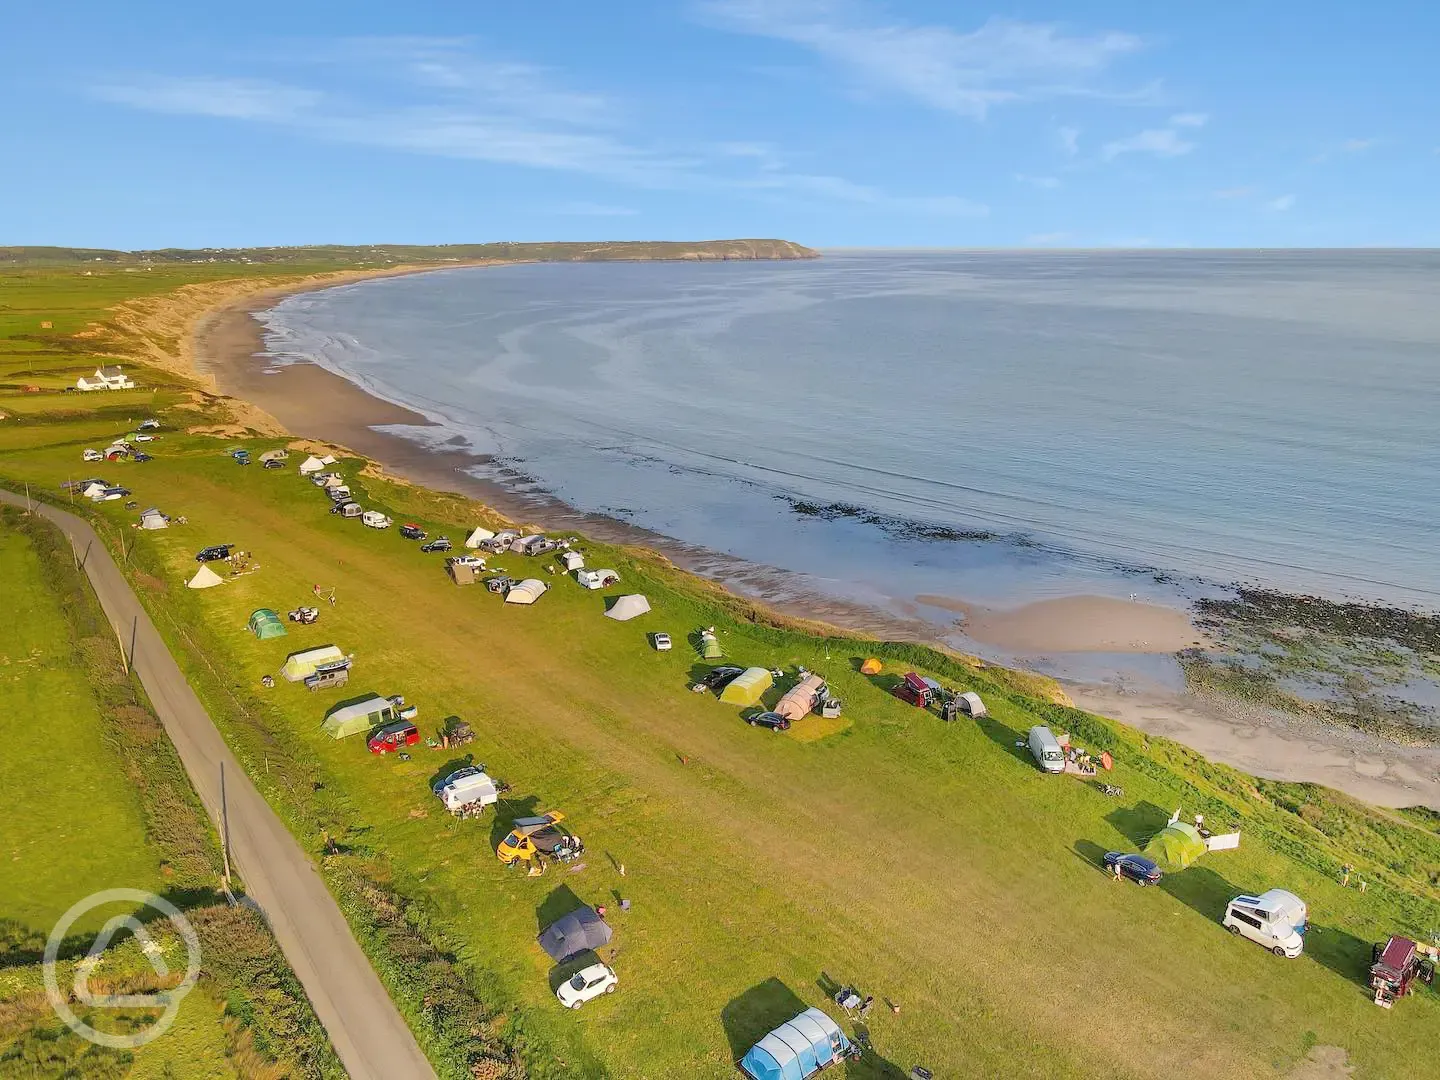 Aerial of campsite by the beach